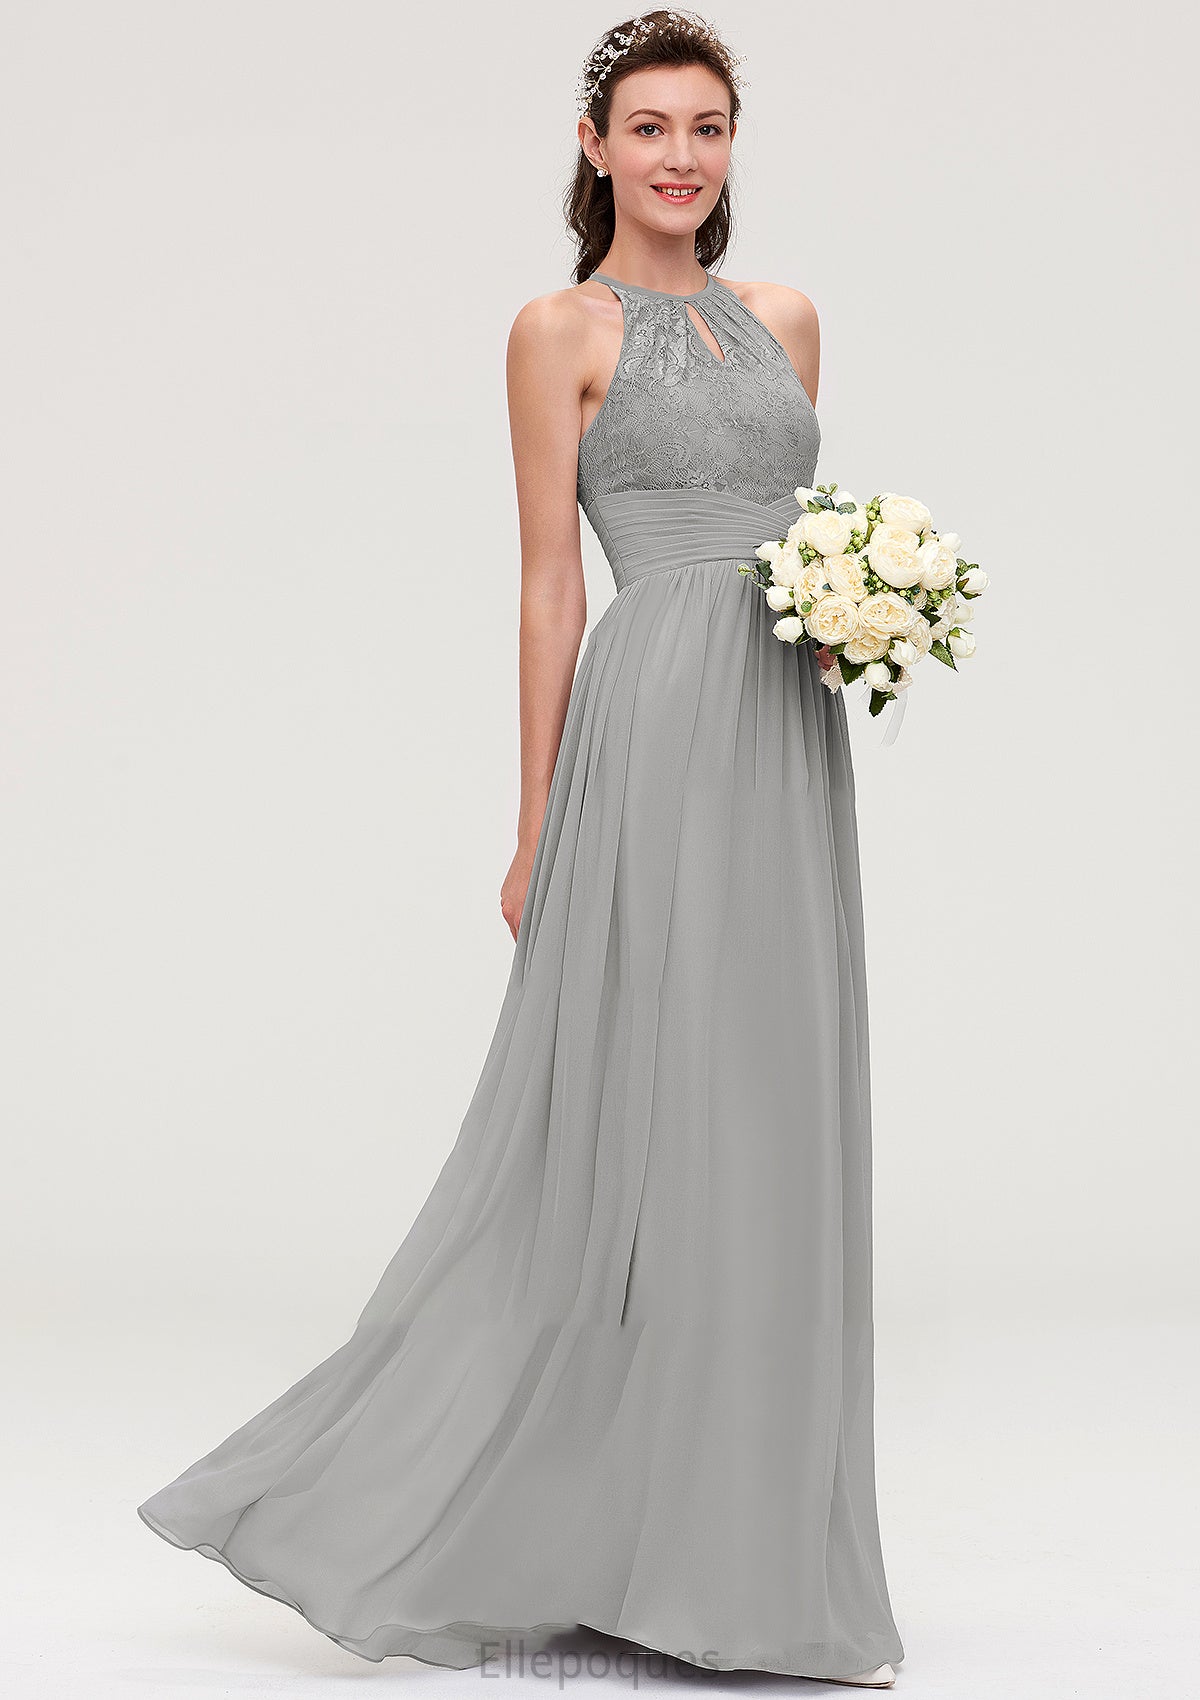 Sleeveless Scoop Neck Chiffon A-line/Princess Long/Floor-Length Bridesmaid Dresseses With Pleated Lace Lauretta HOP0025460